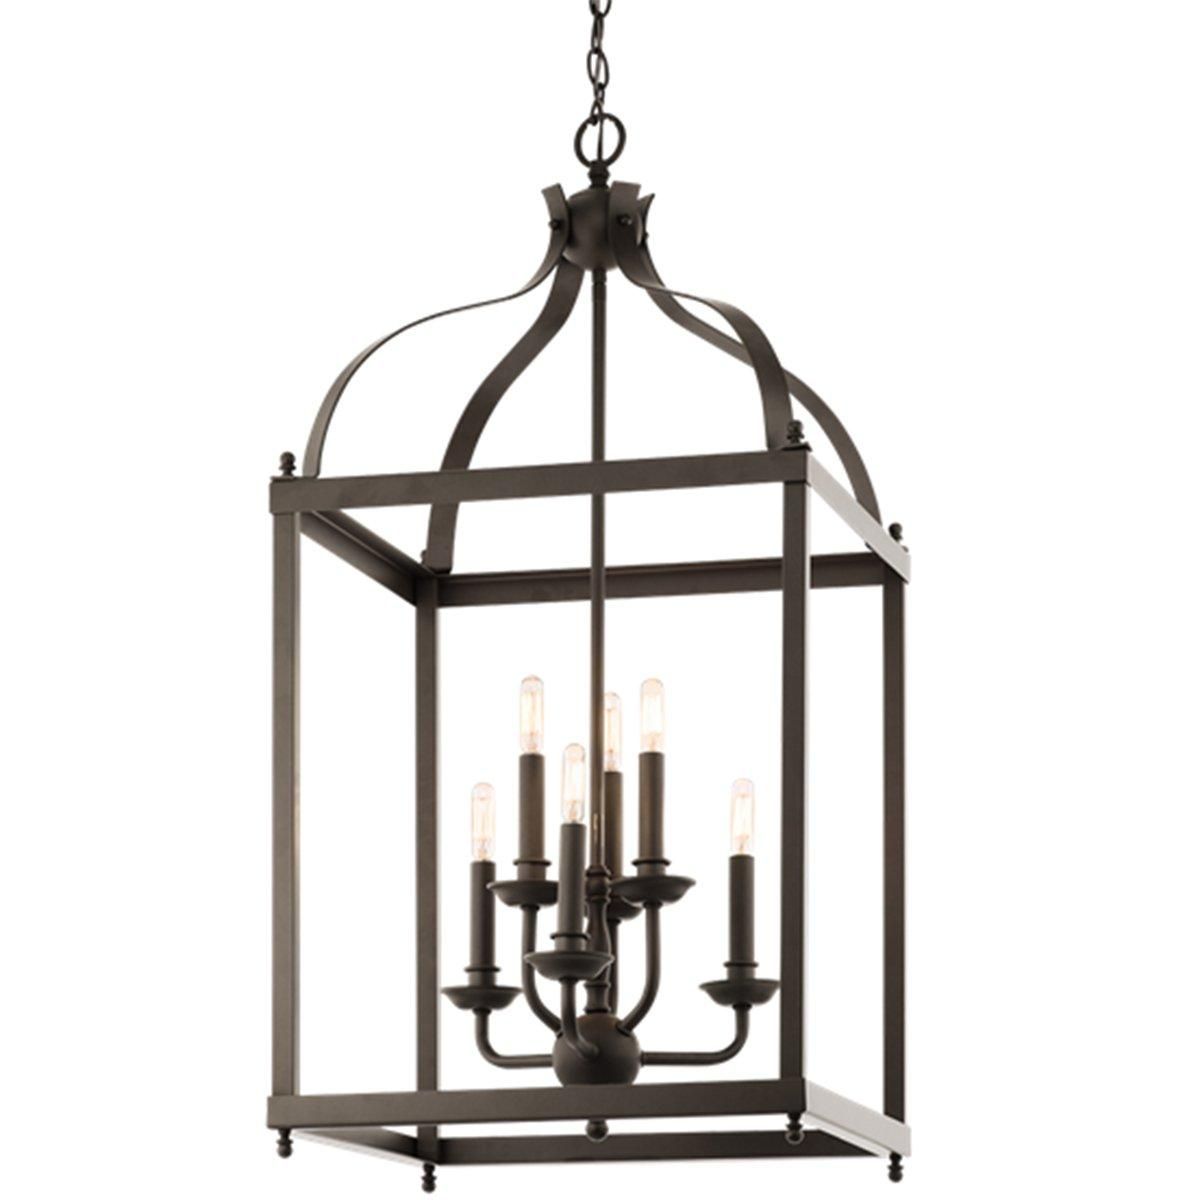 Arched Silhouette Lantern - 6 Light | Shades of Light